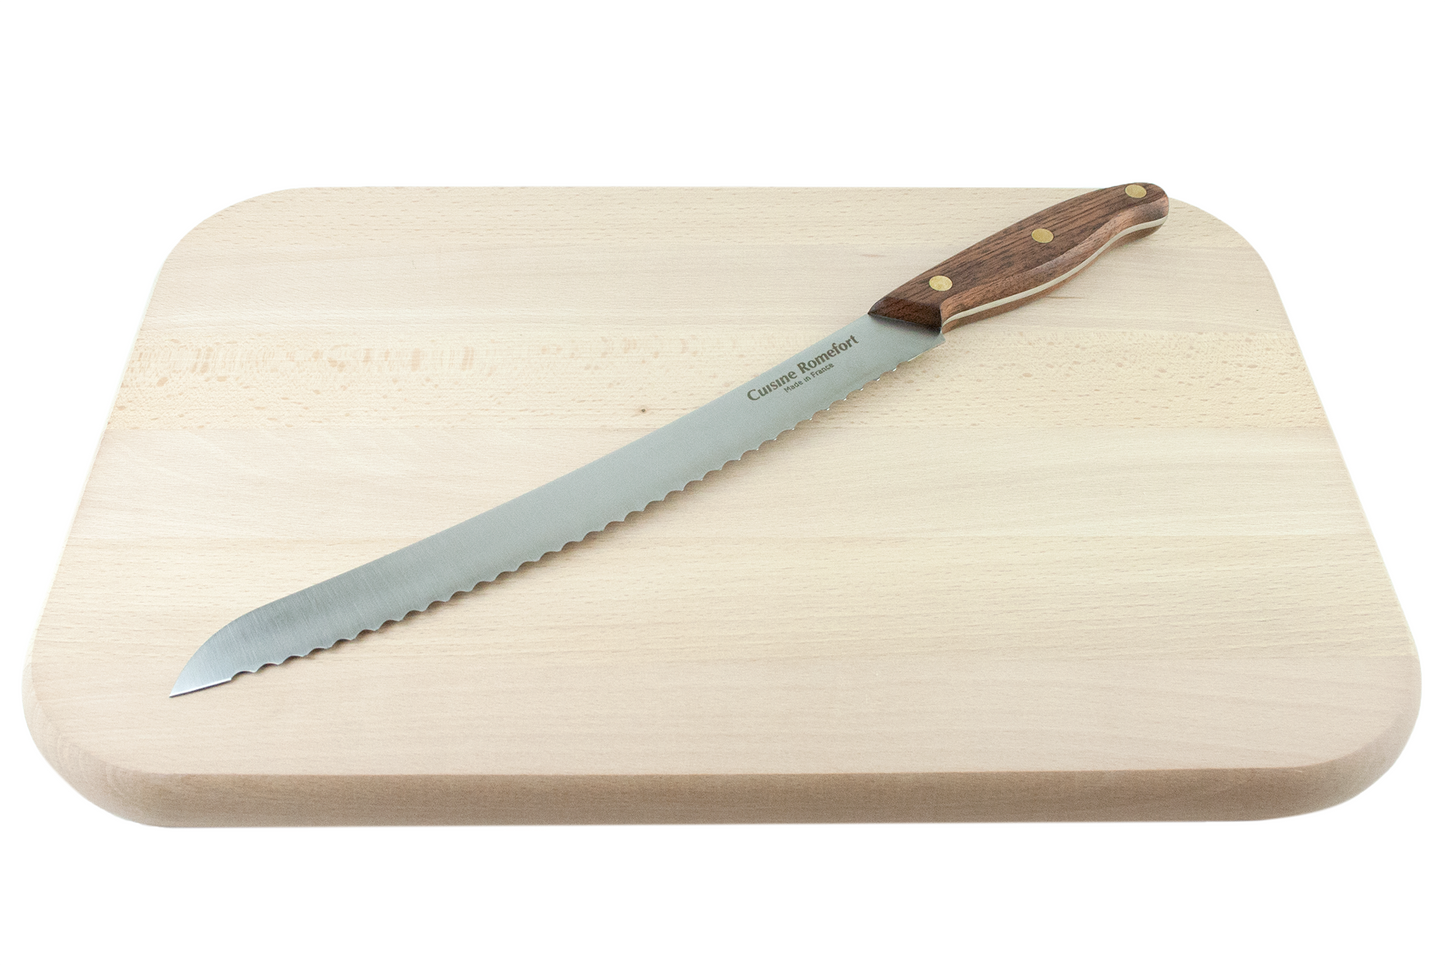 Bread knife 11.8 inches blade